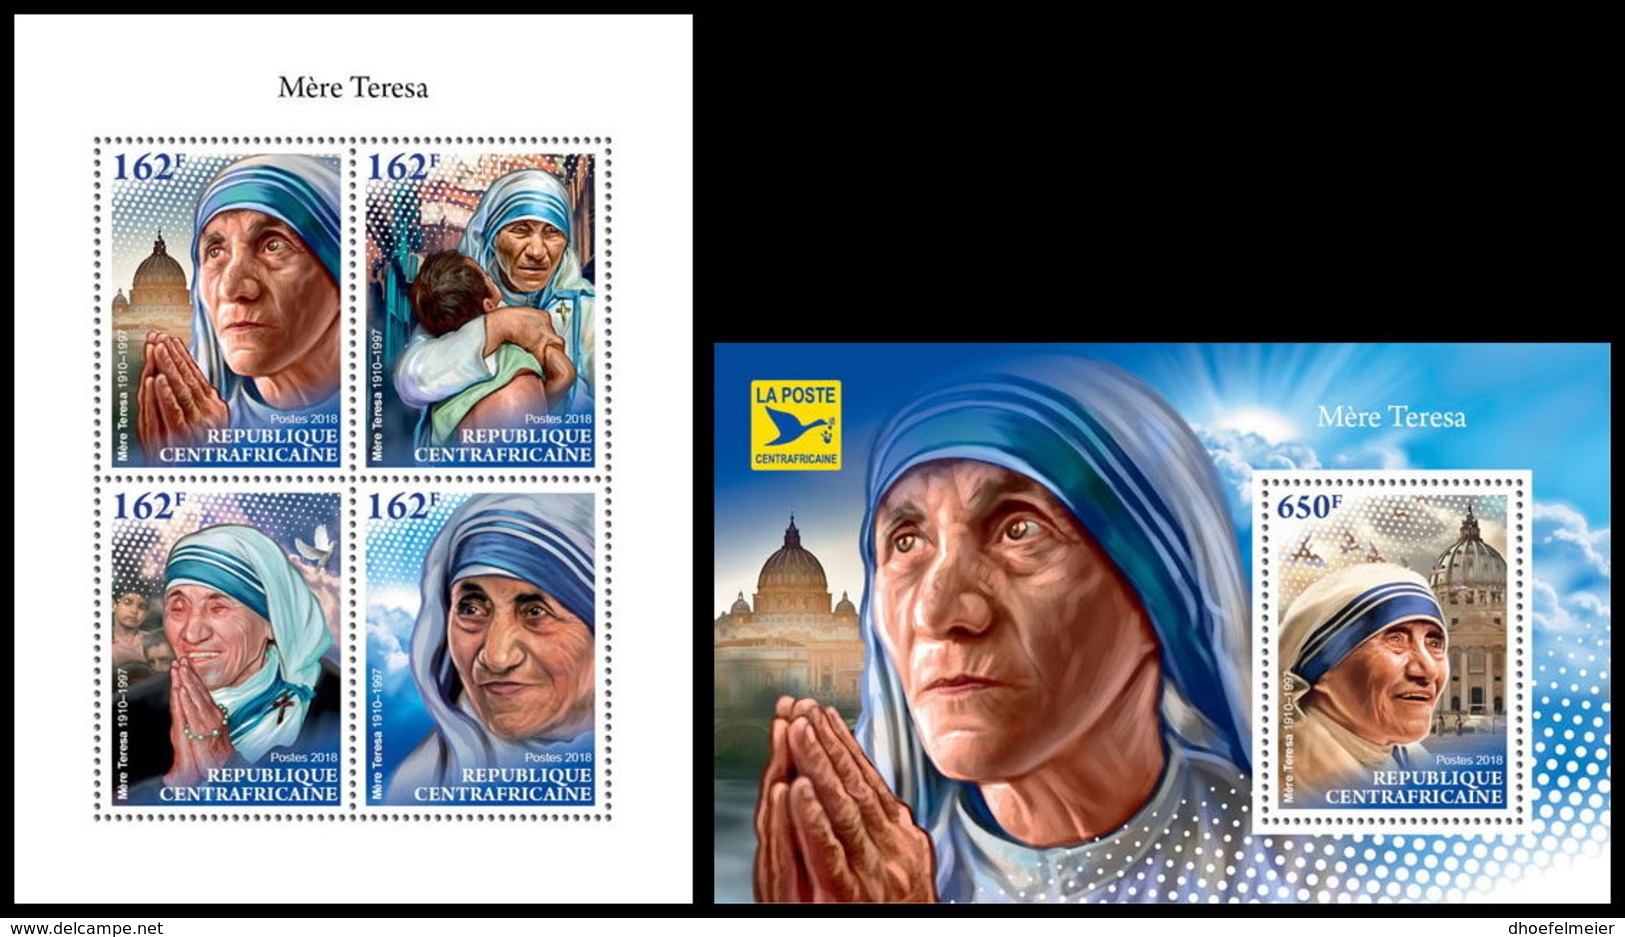 CENTRAL AFRICA 2018 **MNH SMALL Mother Teresa Mutter Teresa Mere Teresa M/S+S/S - IMPERFORATED - DH1845 - Mother Teresa